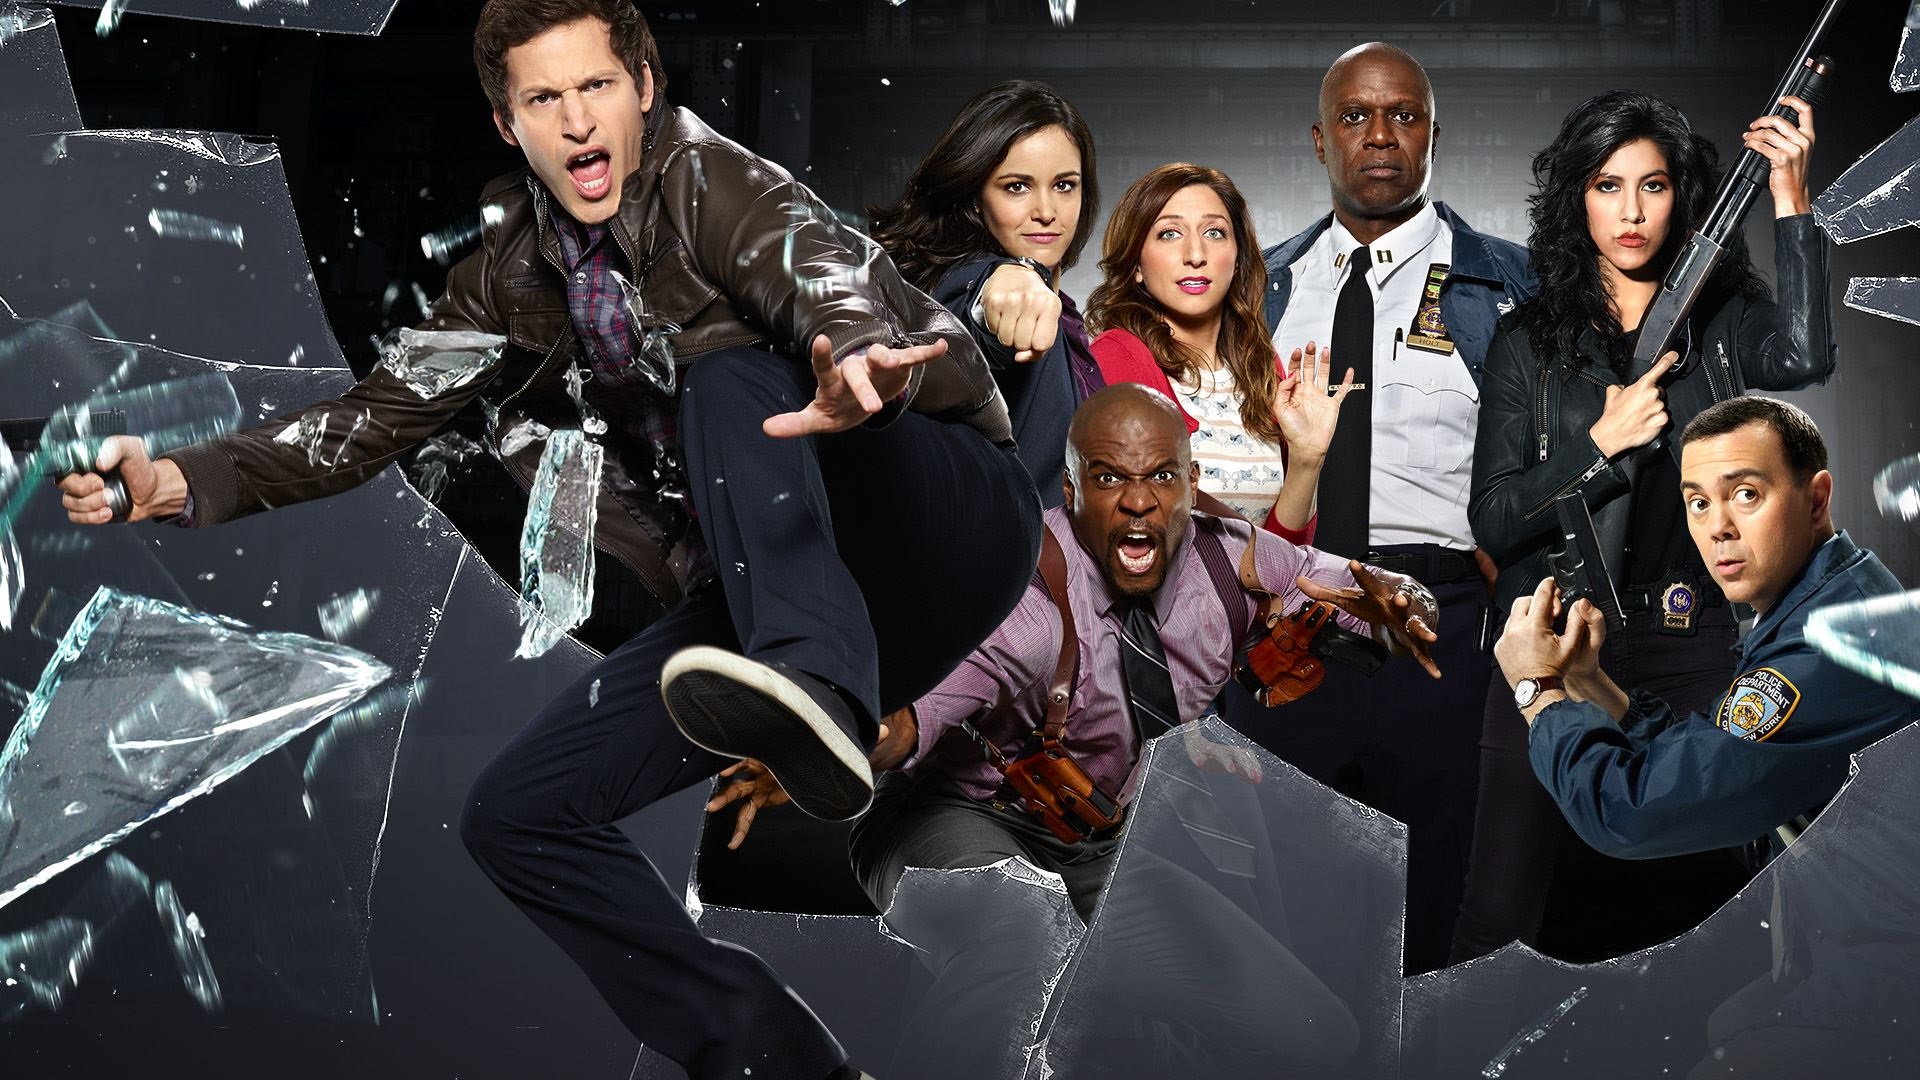 Brooklyn Nine-Nine Wallpapers, Pictures, Images